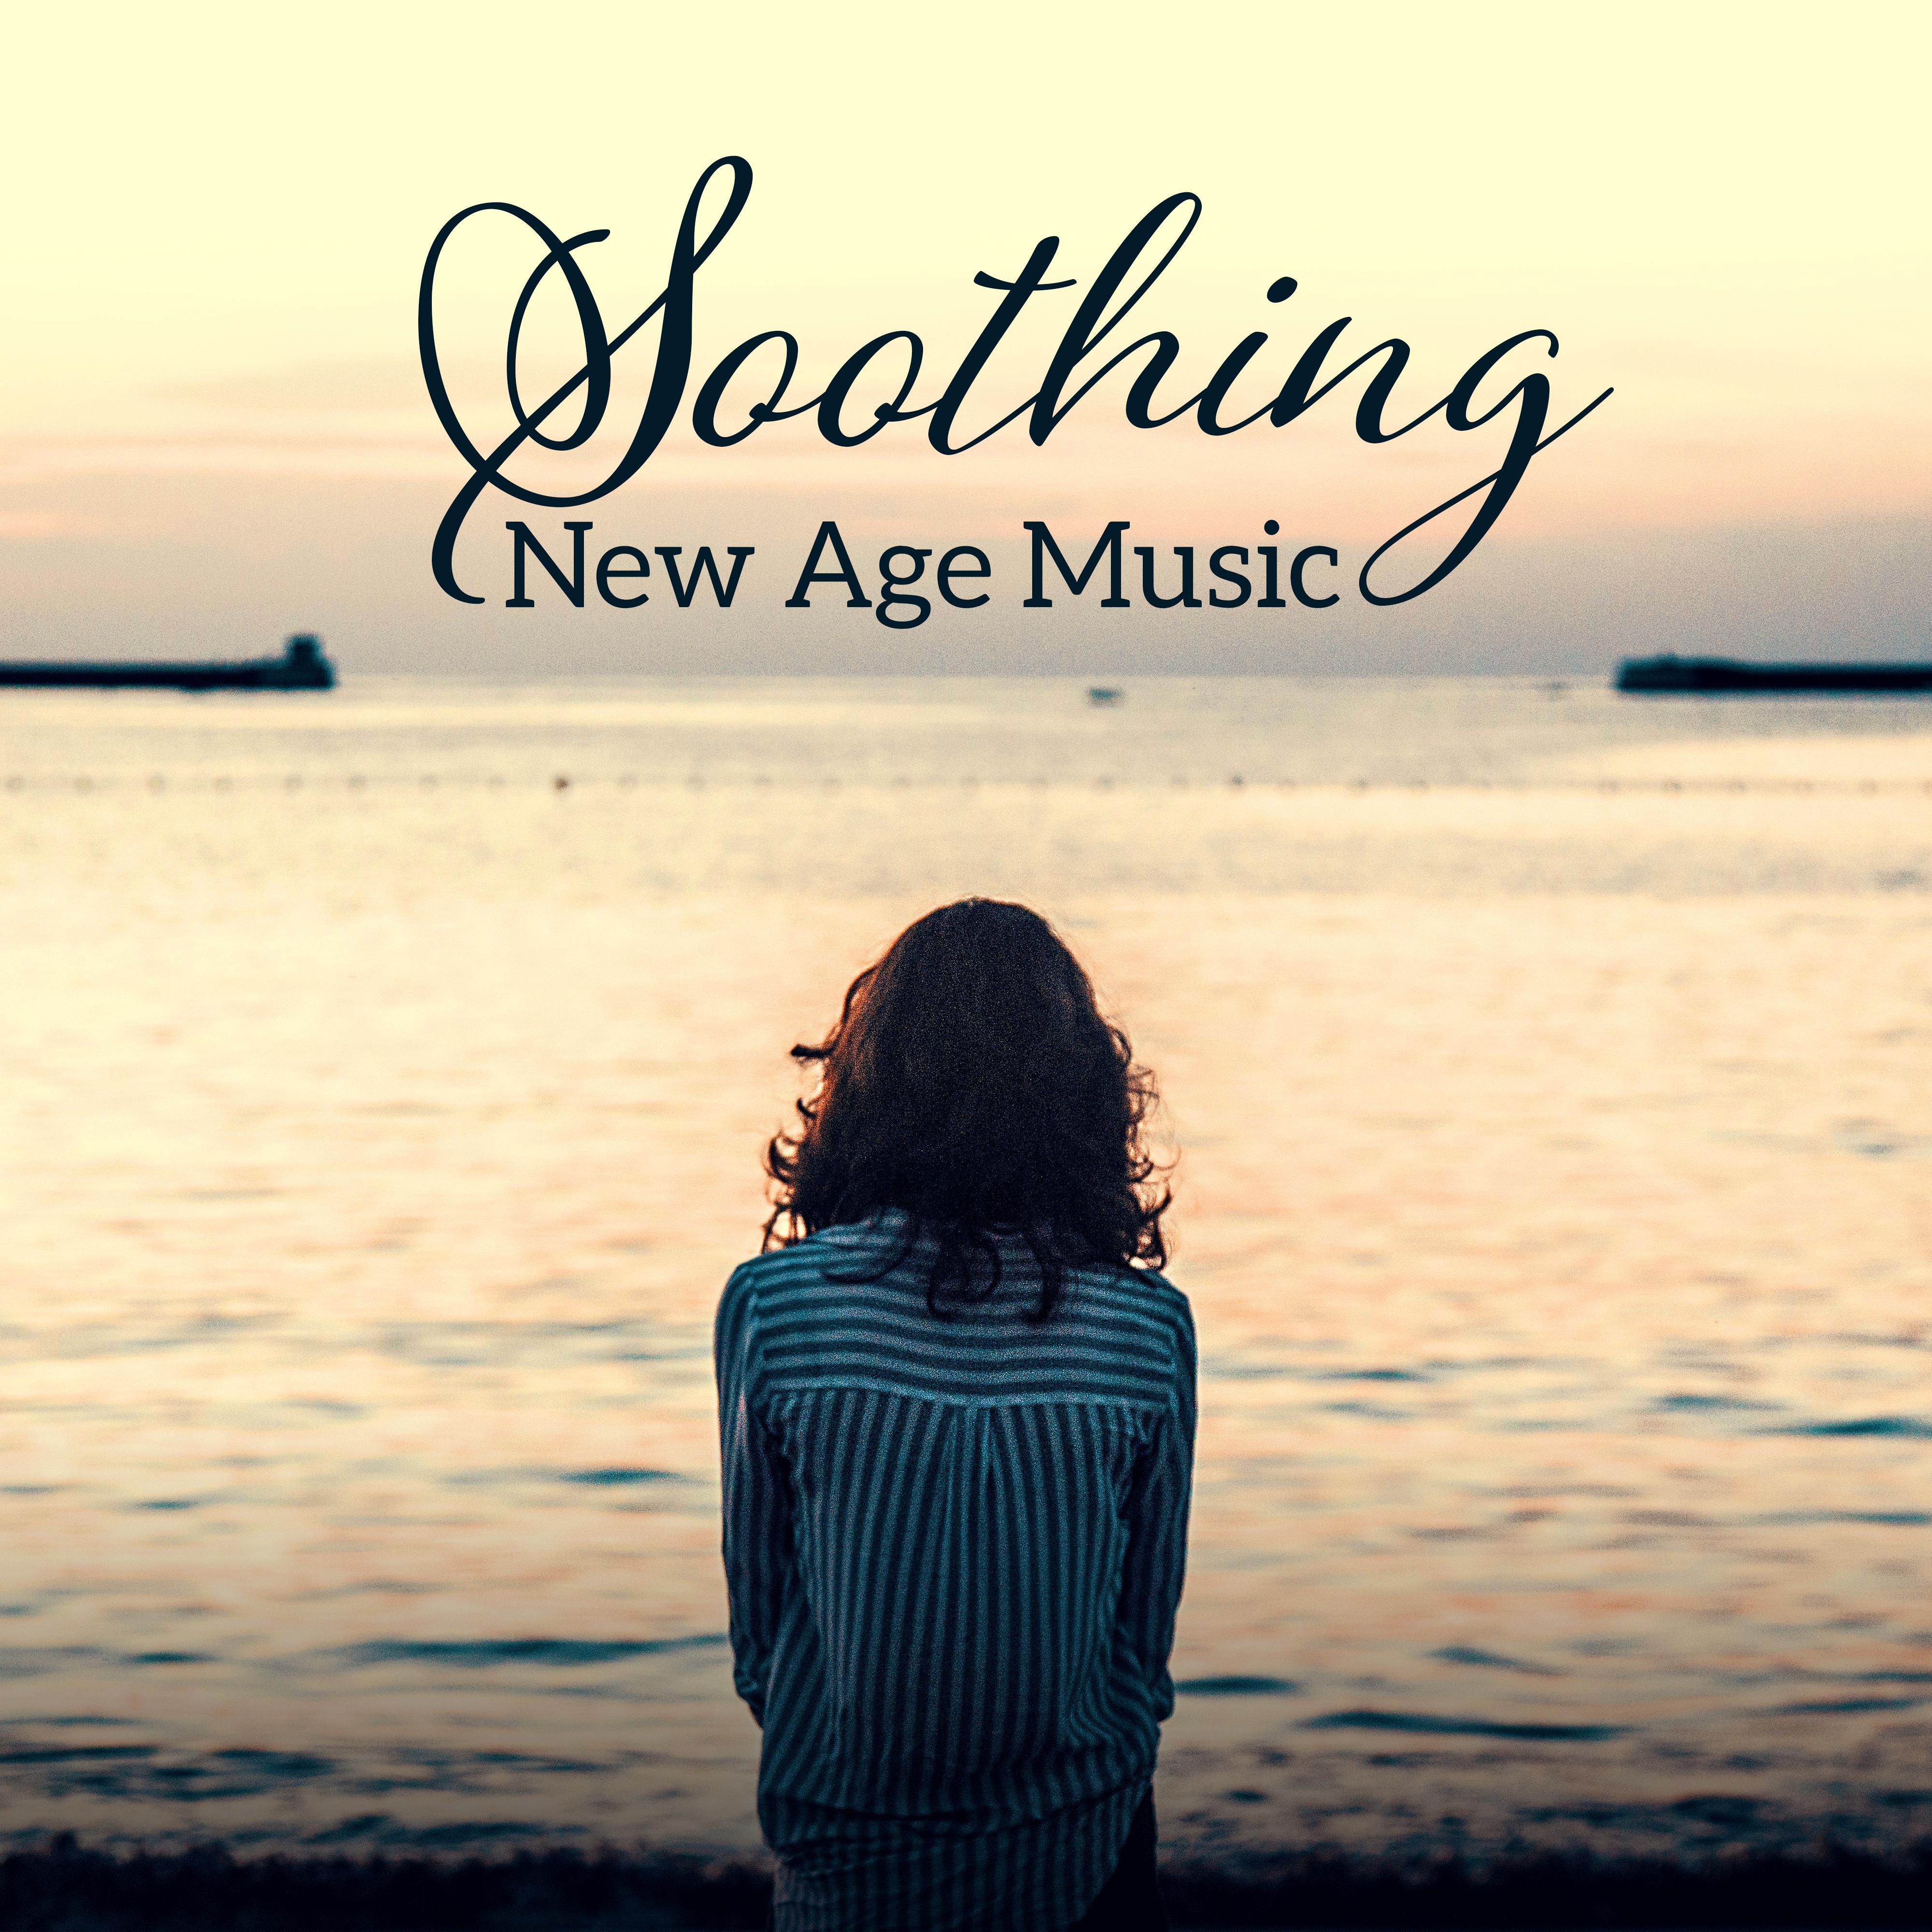 Soothing New Age Music – Relaxing Songs, Full Of Nature Sounds, Feel Zen, Rest, Relief Stress